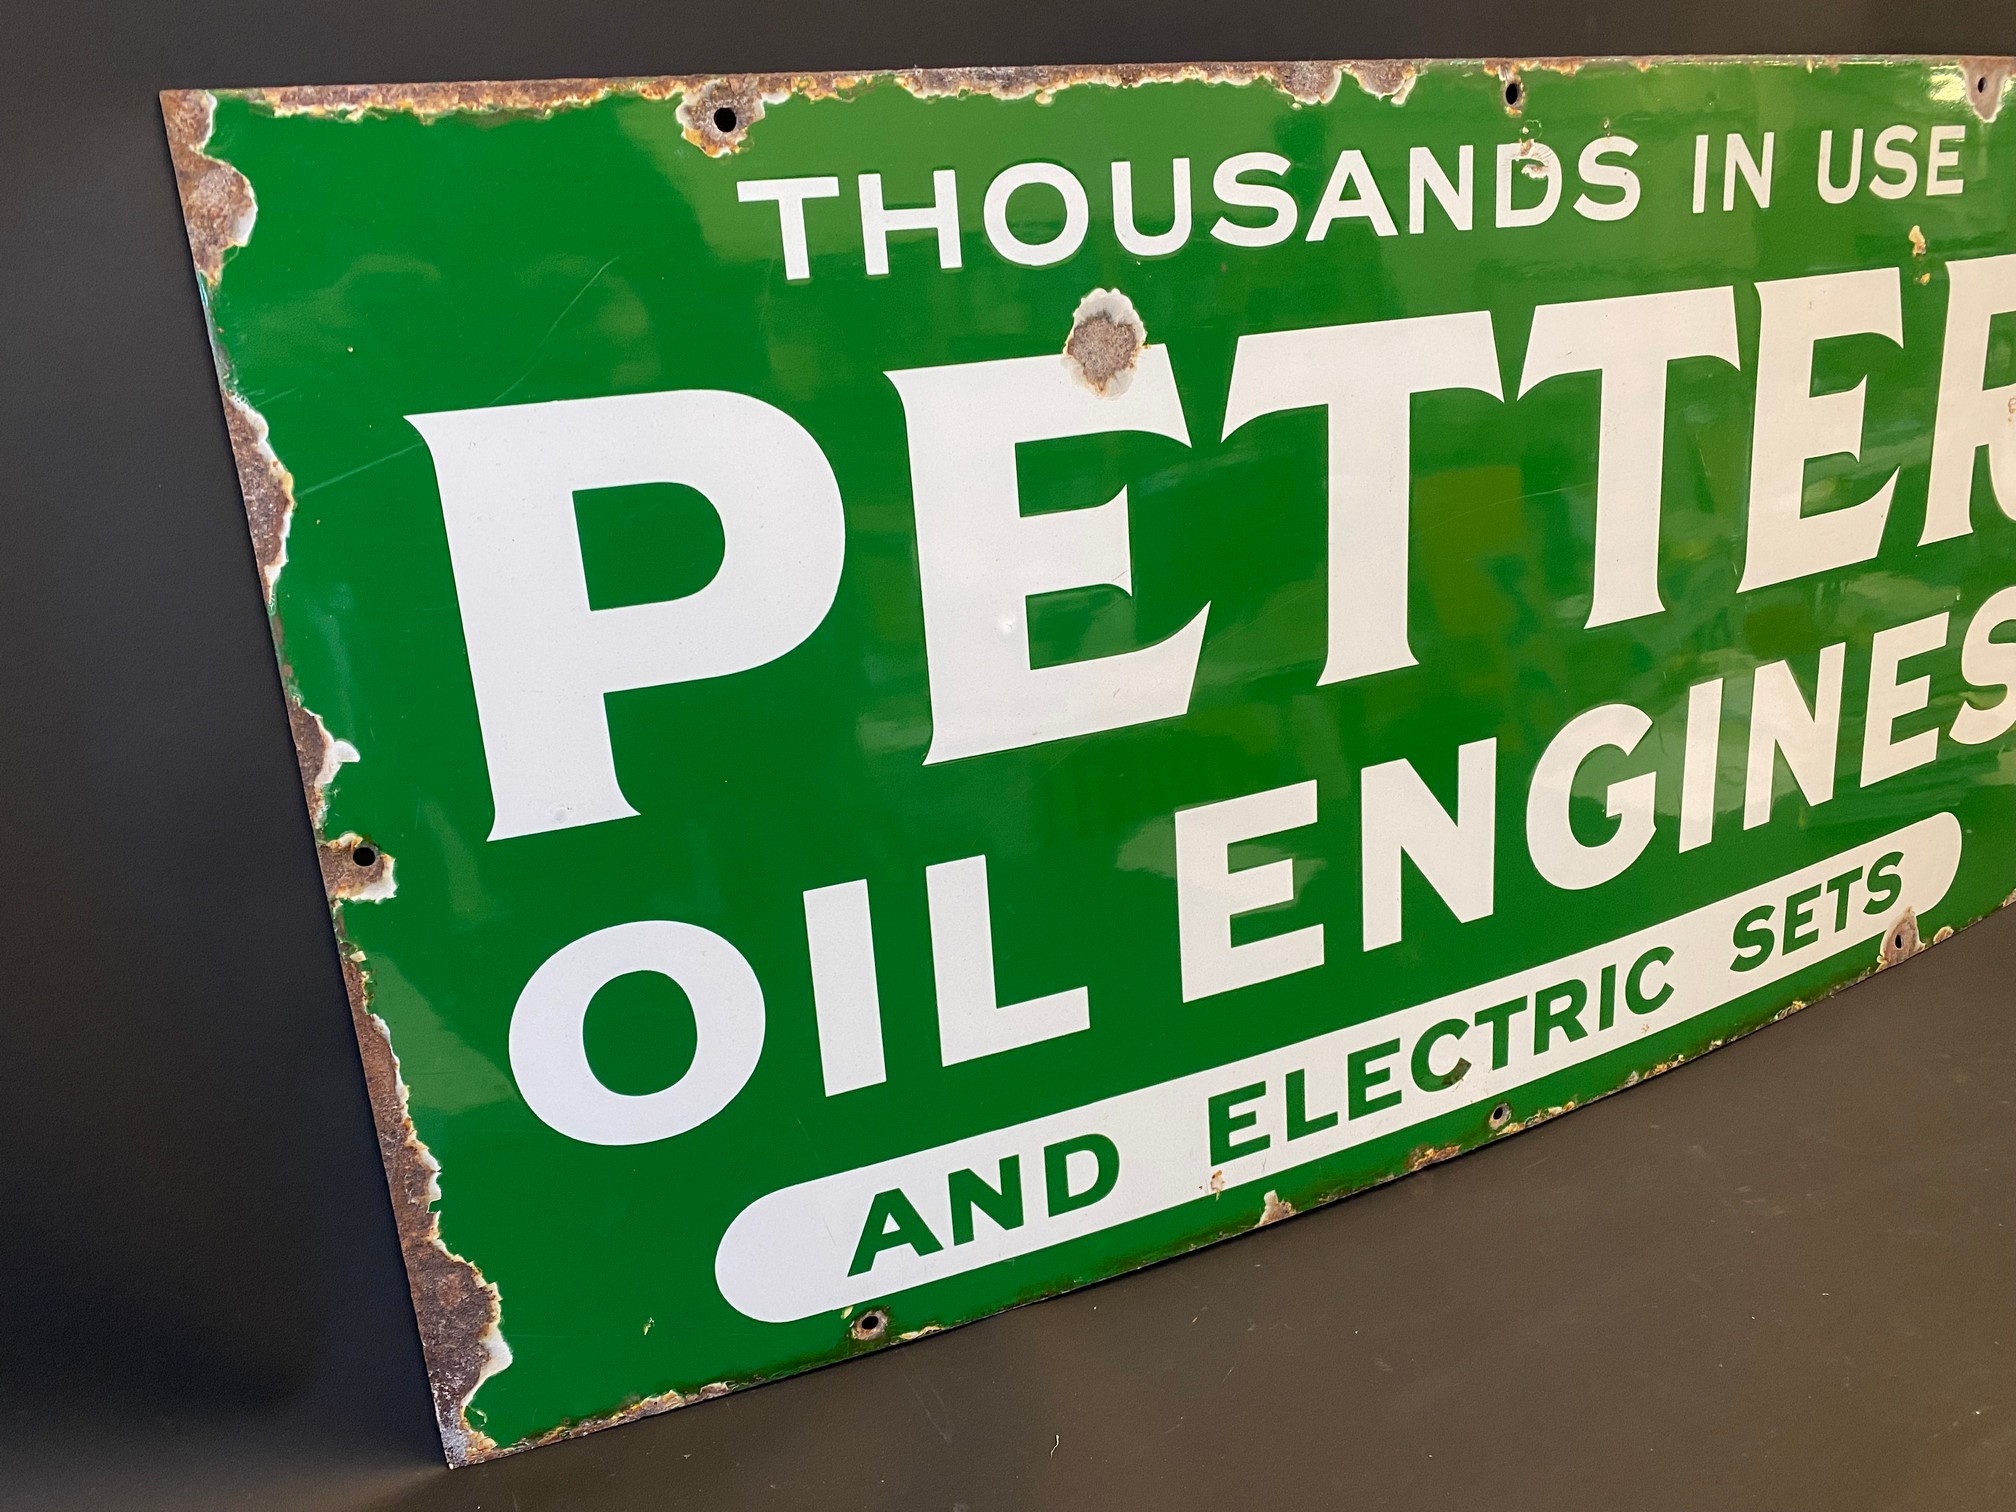 A Petter Oil Engines and Electric Sets, rectangular enamel sign with excellent gloss, 36 x 18". - Image 2 of 4